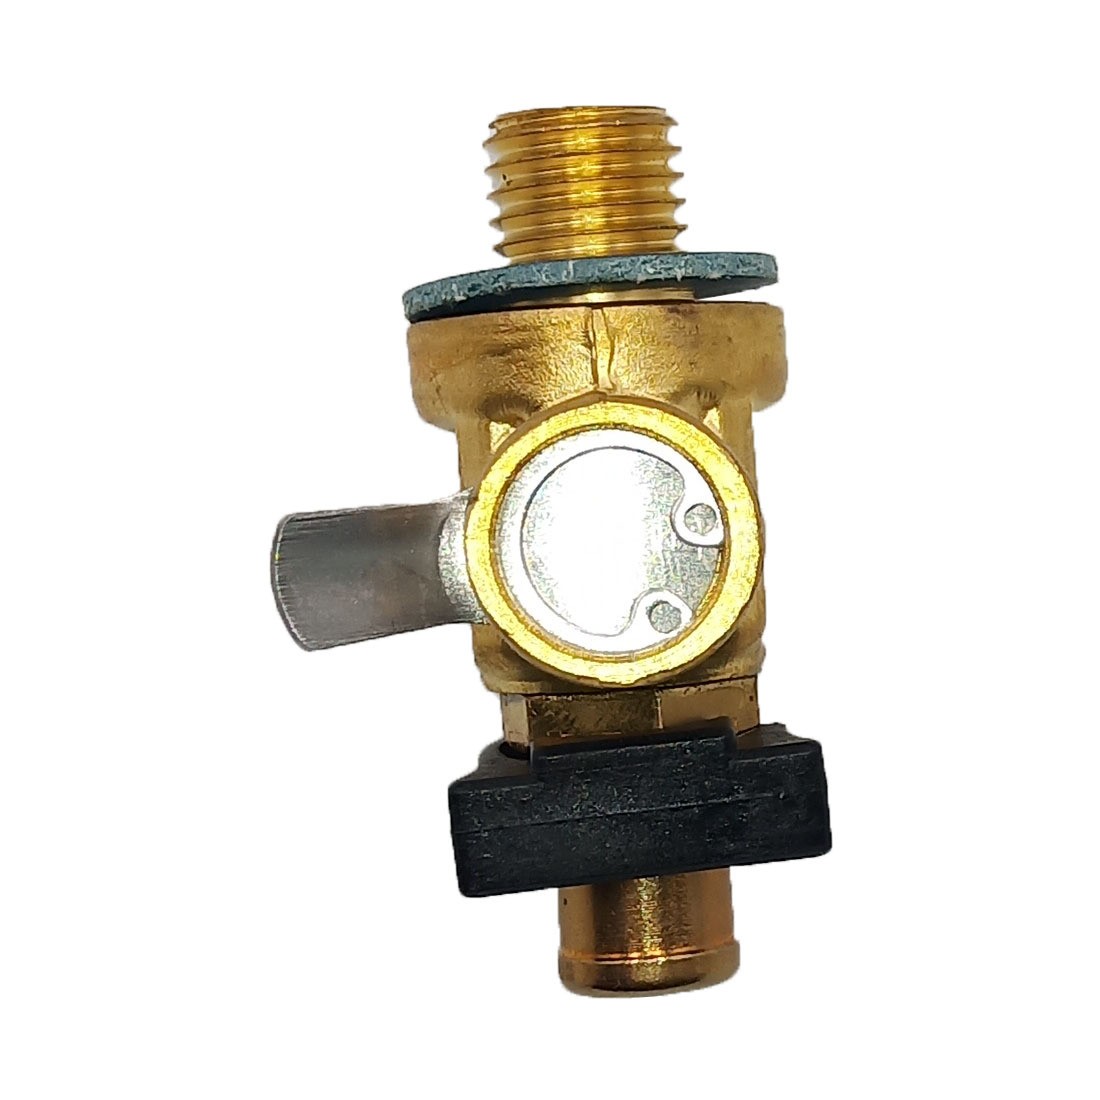 For Volmotovo Movo Moto F139n Oil Pan Drain Valve , 12-1.5 Thread Pitch Replacement F109n Valve